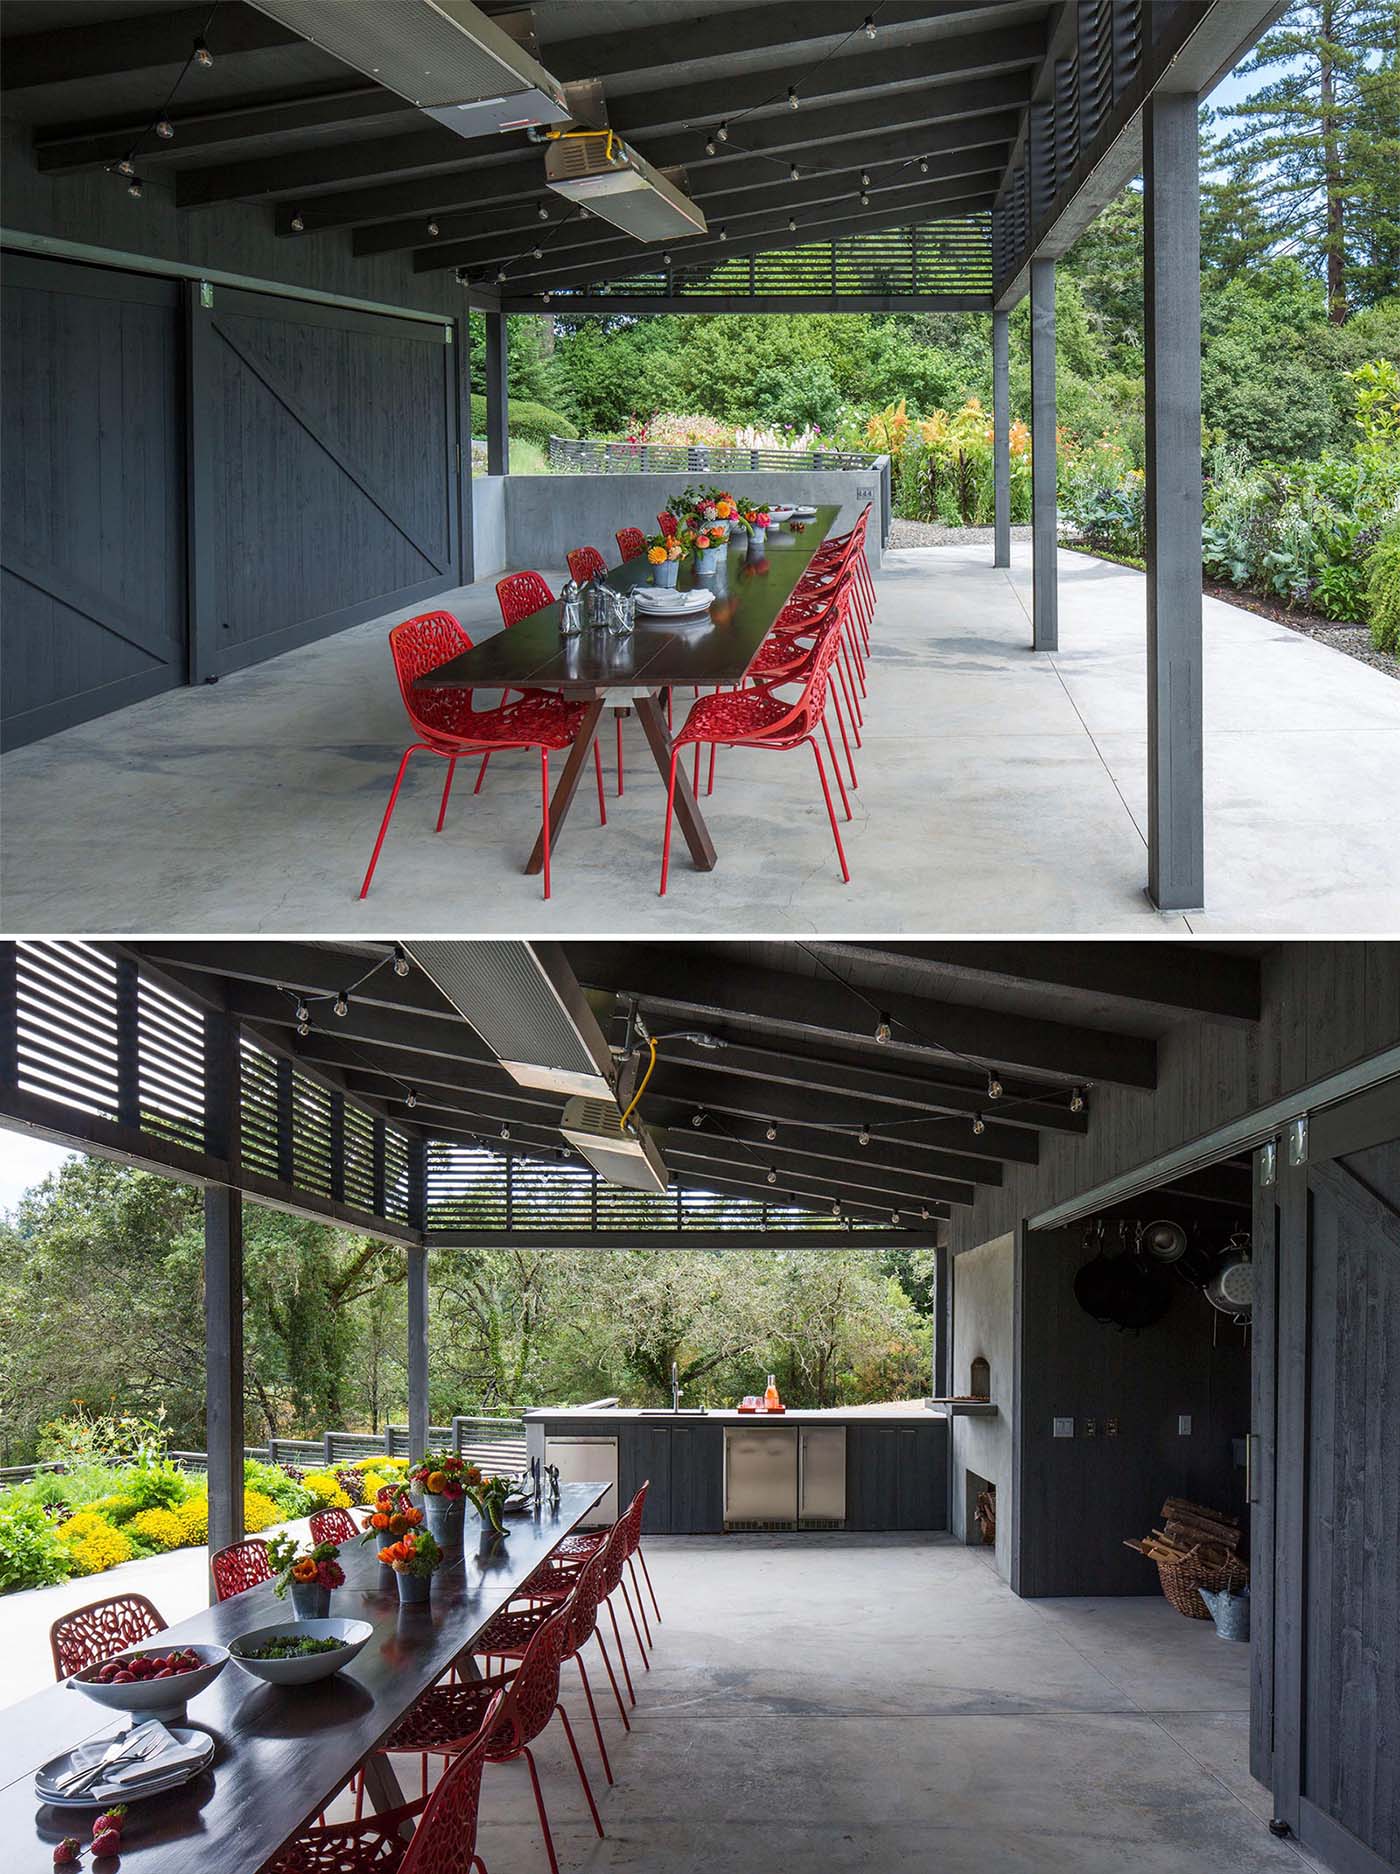 An outdoor pavilion includes dining area, a kitchen area with fridges, a pizza oven and firewood storage, as well as a separate space for storing garden items. This small room can be hidden from view by the large sliding barn doors.